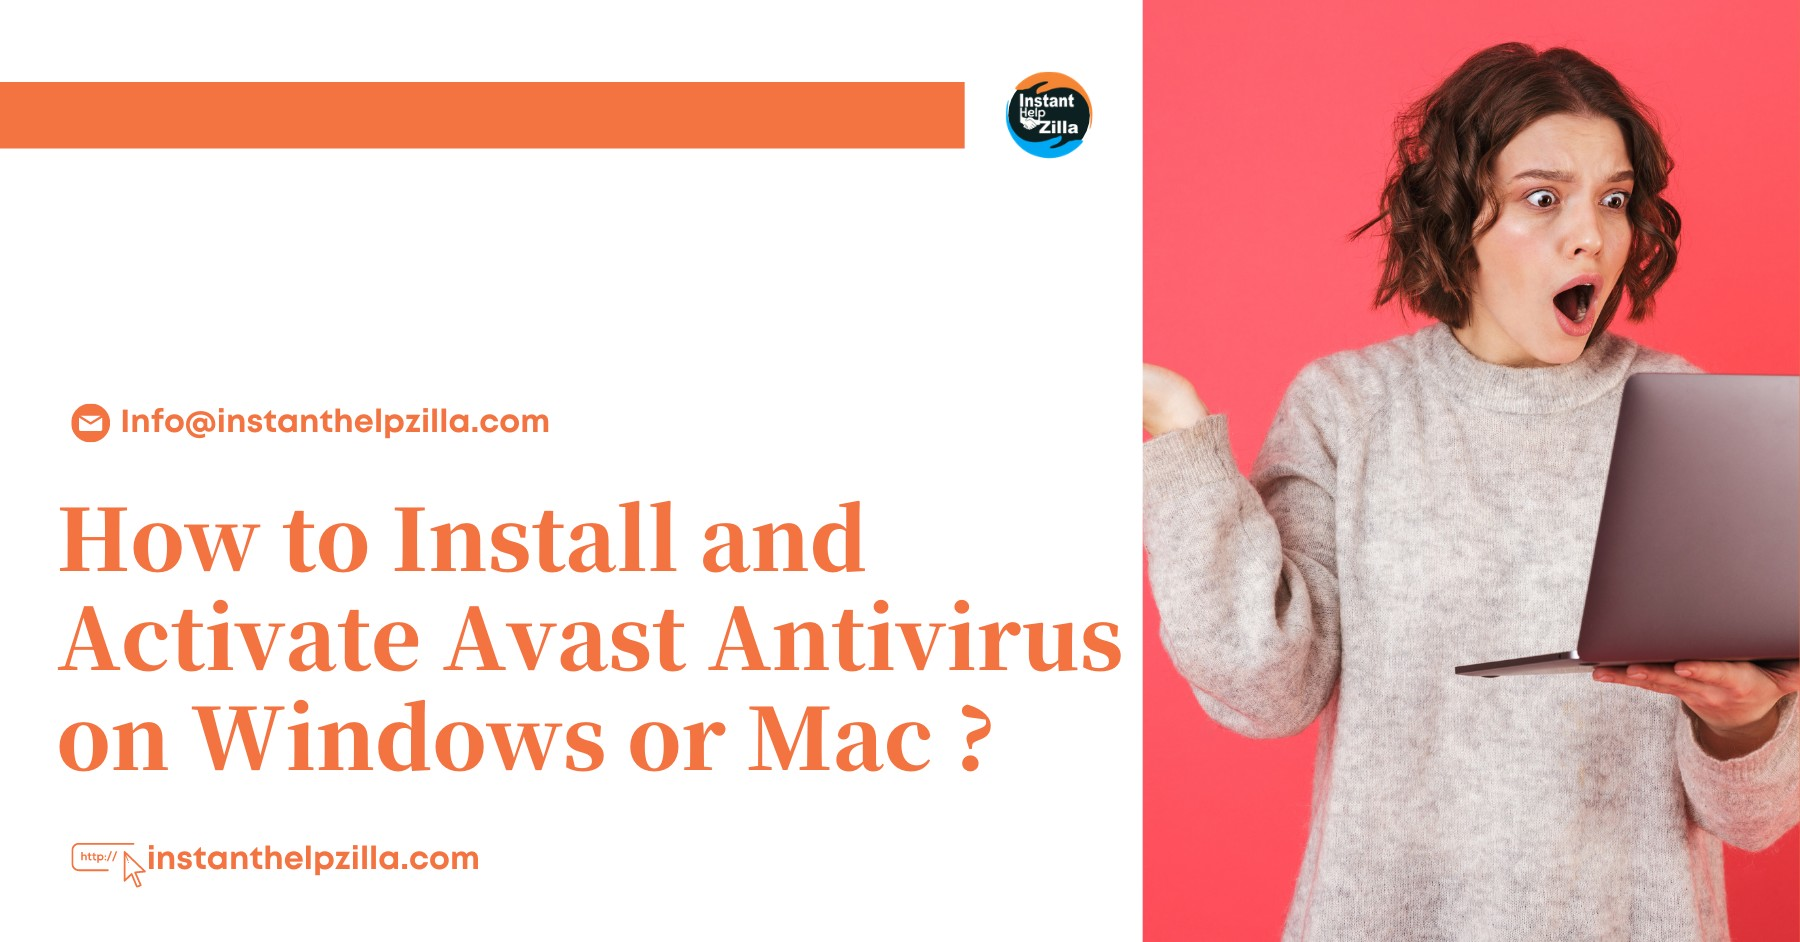 Download and Install Avast Antivirus on Device